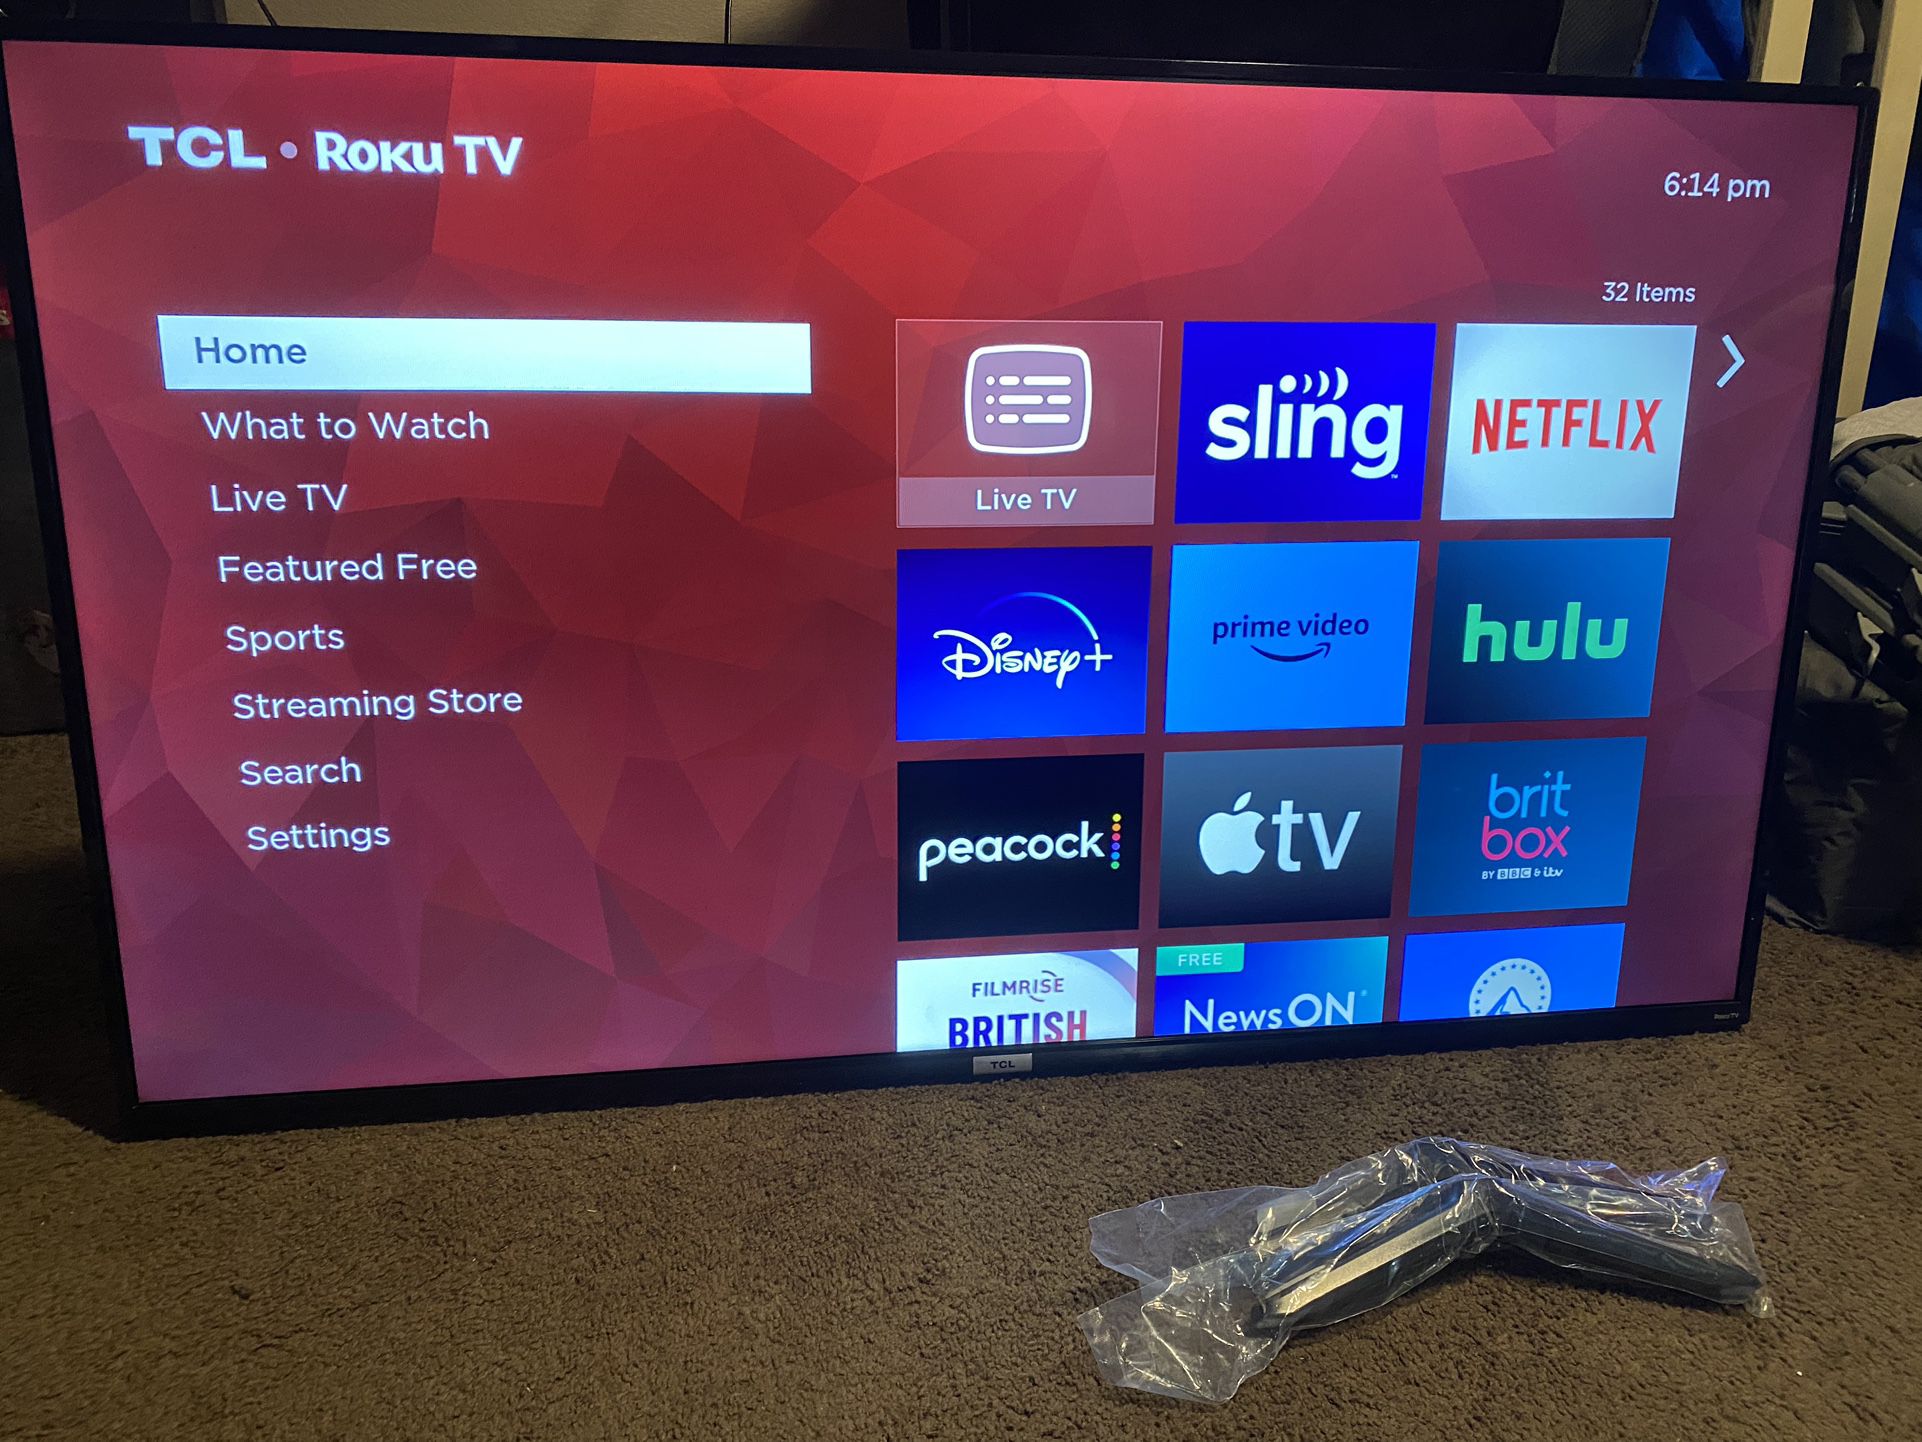 55in TCL TV Smart TV